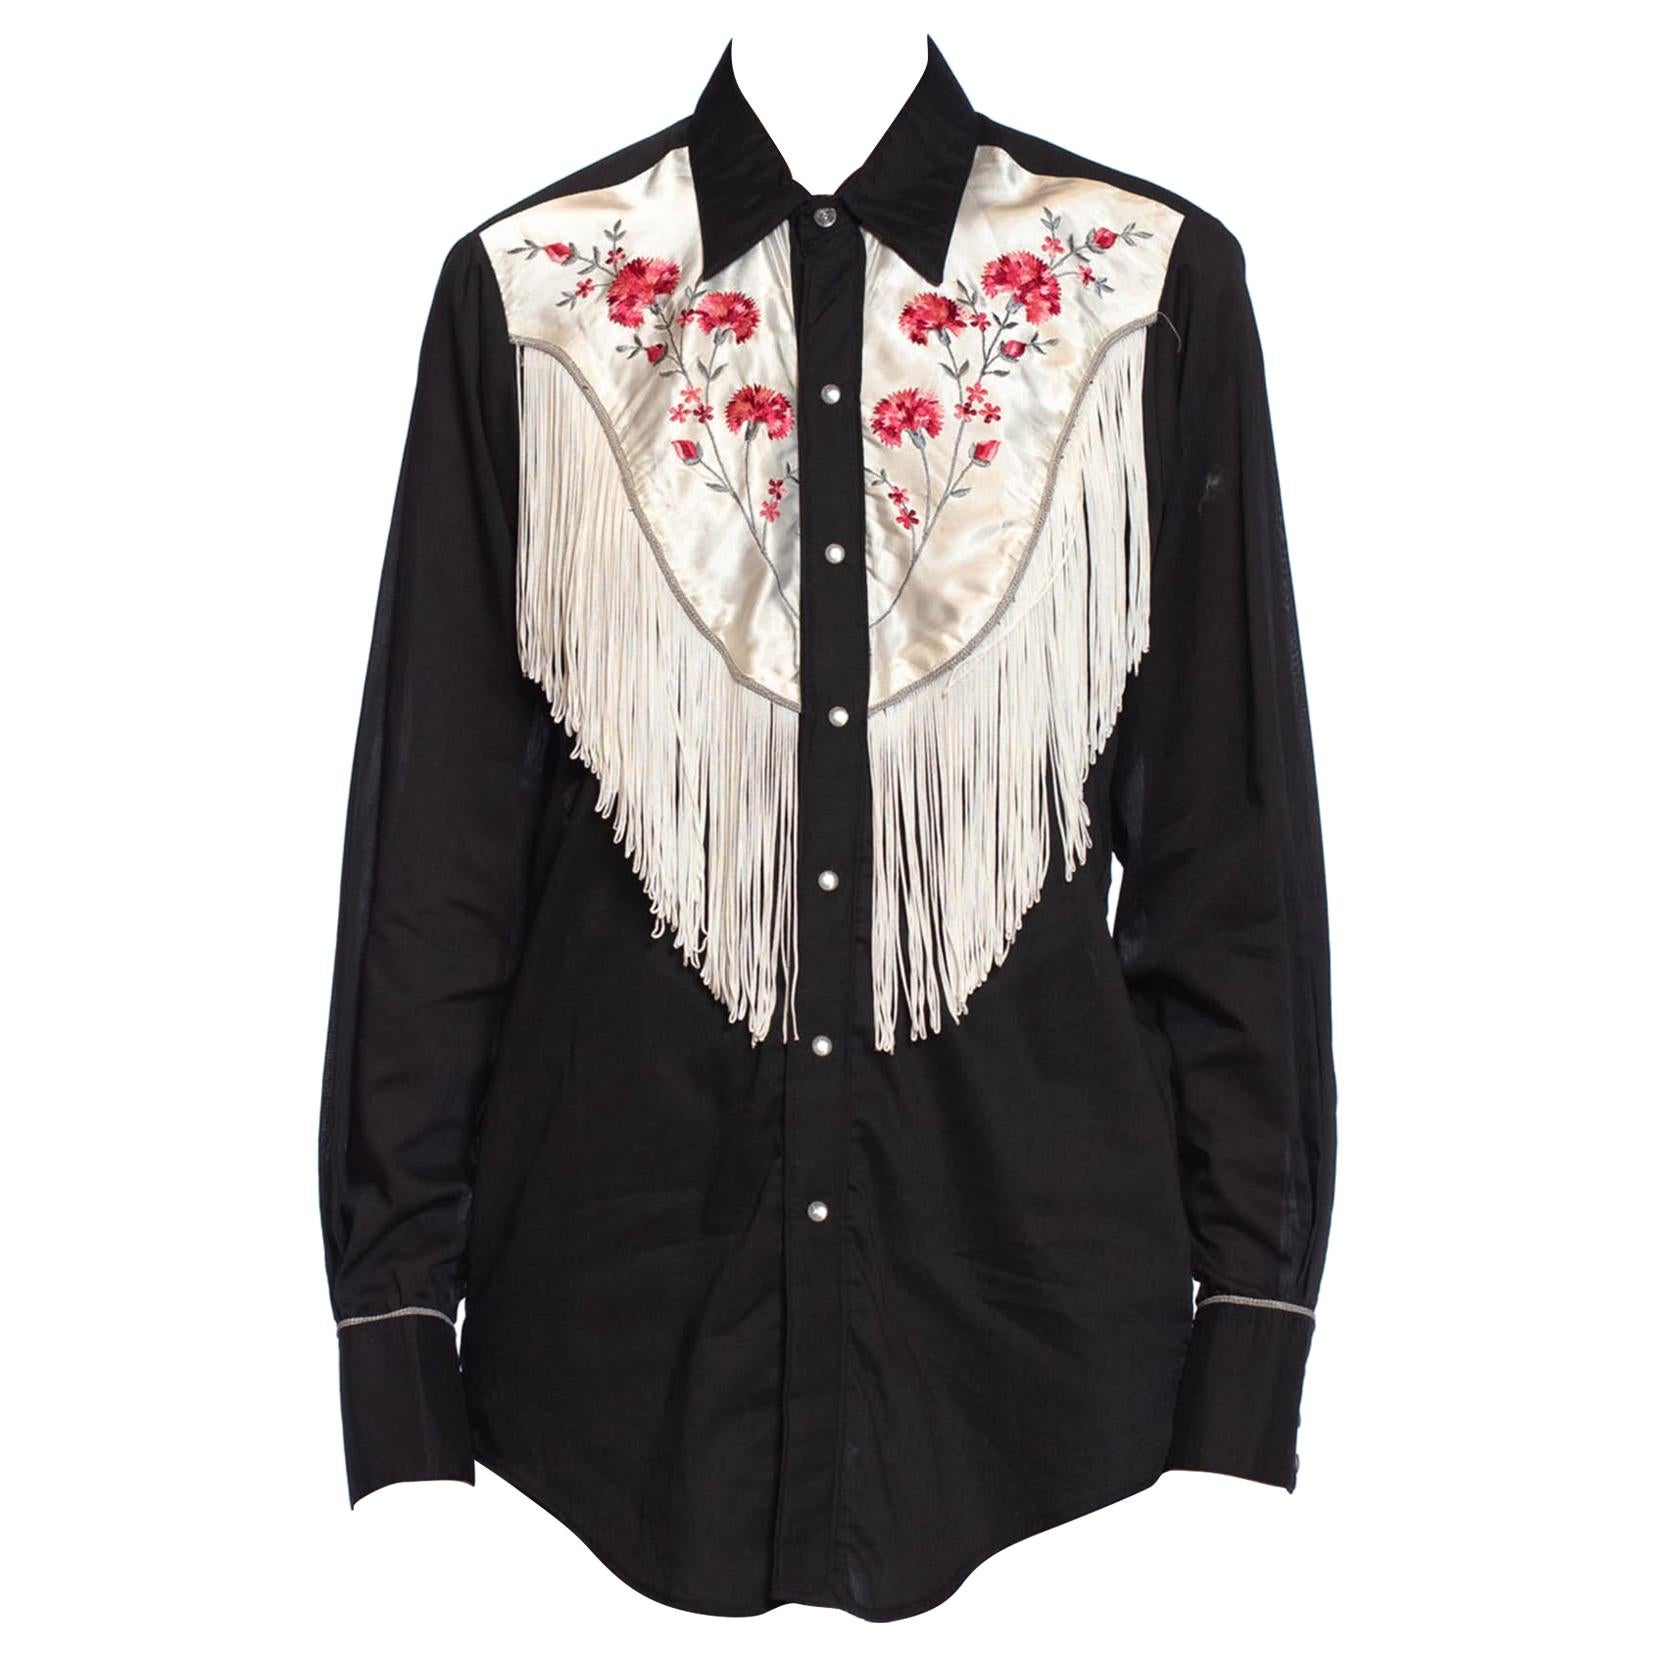 1970S Black & White Cotton Western Shirt With Fringe And Satin Floral Embroider